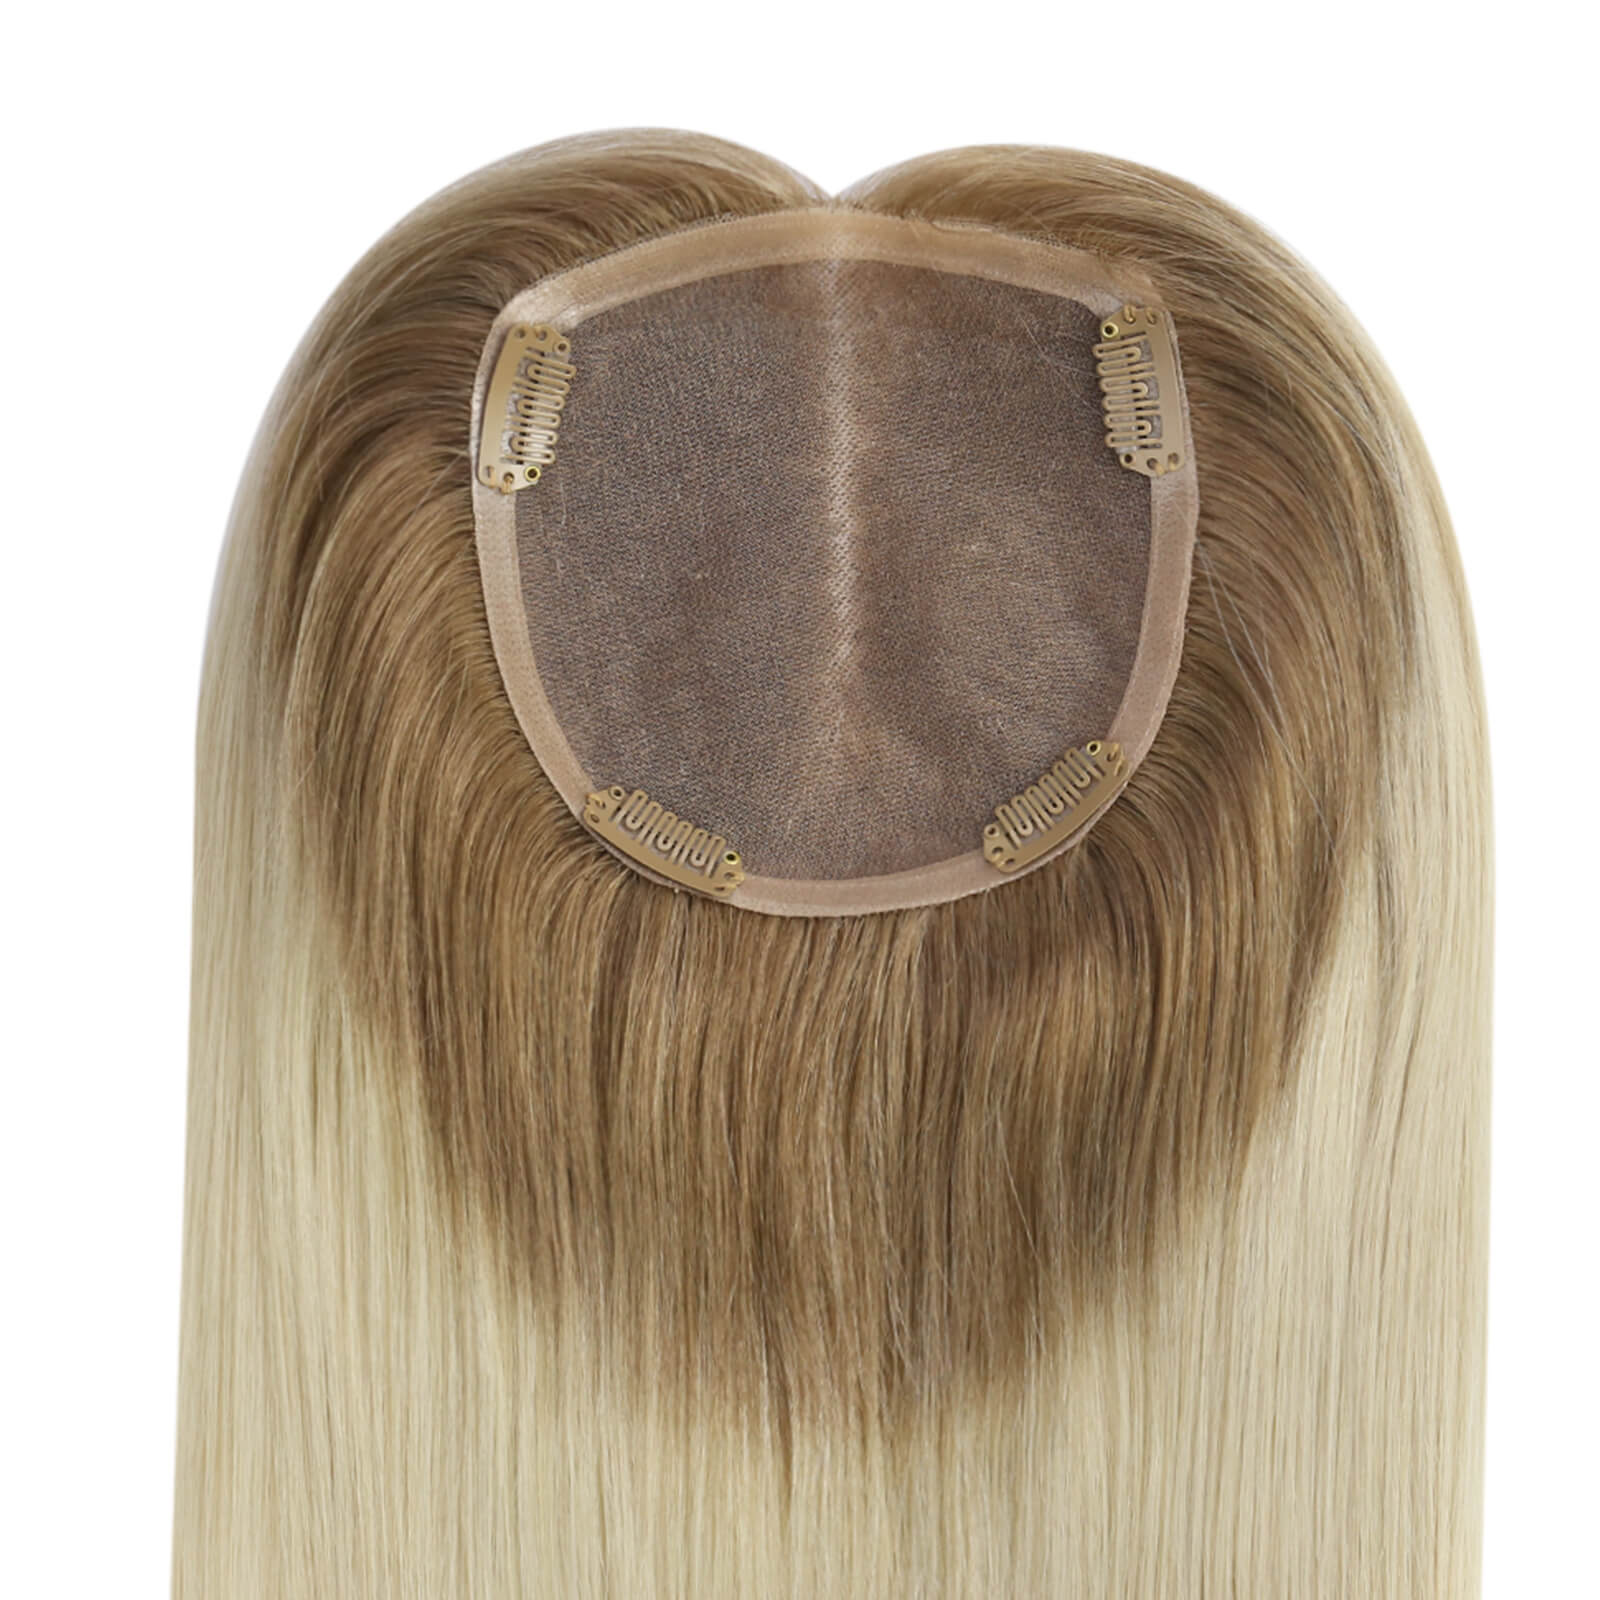 human hair toupee for women real human hair toppee with clip